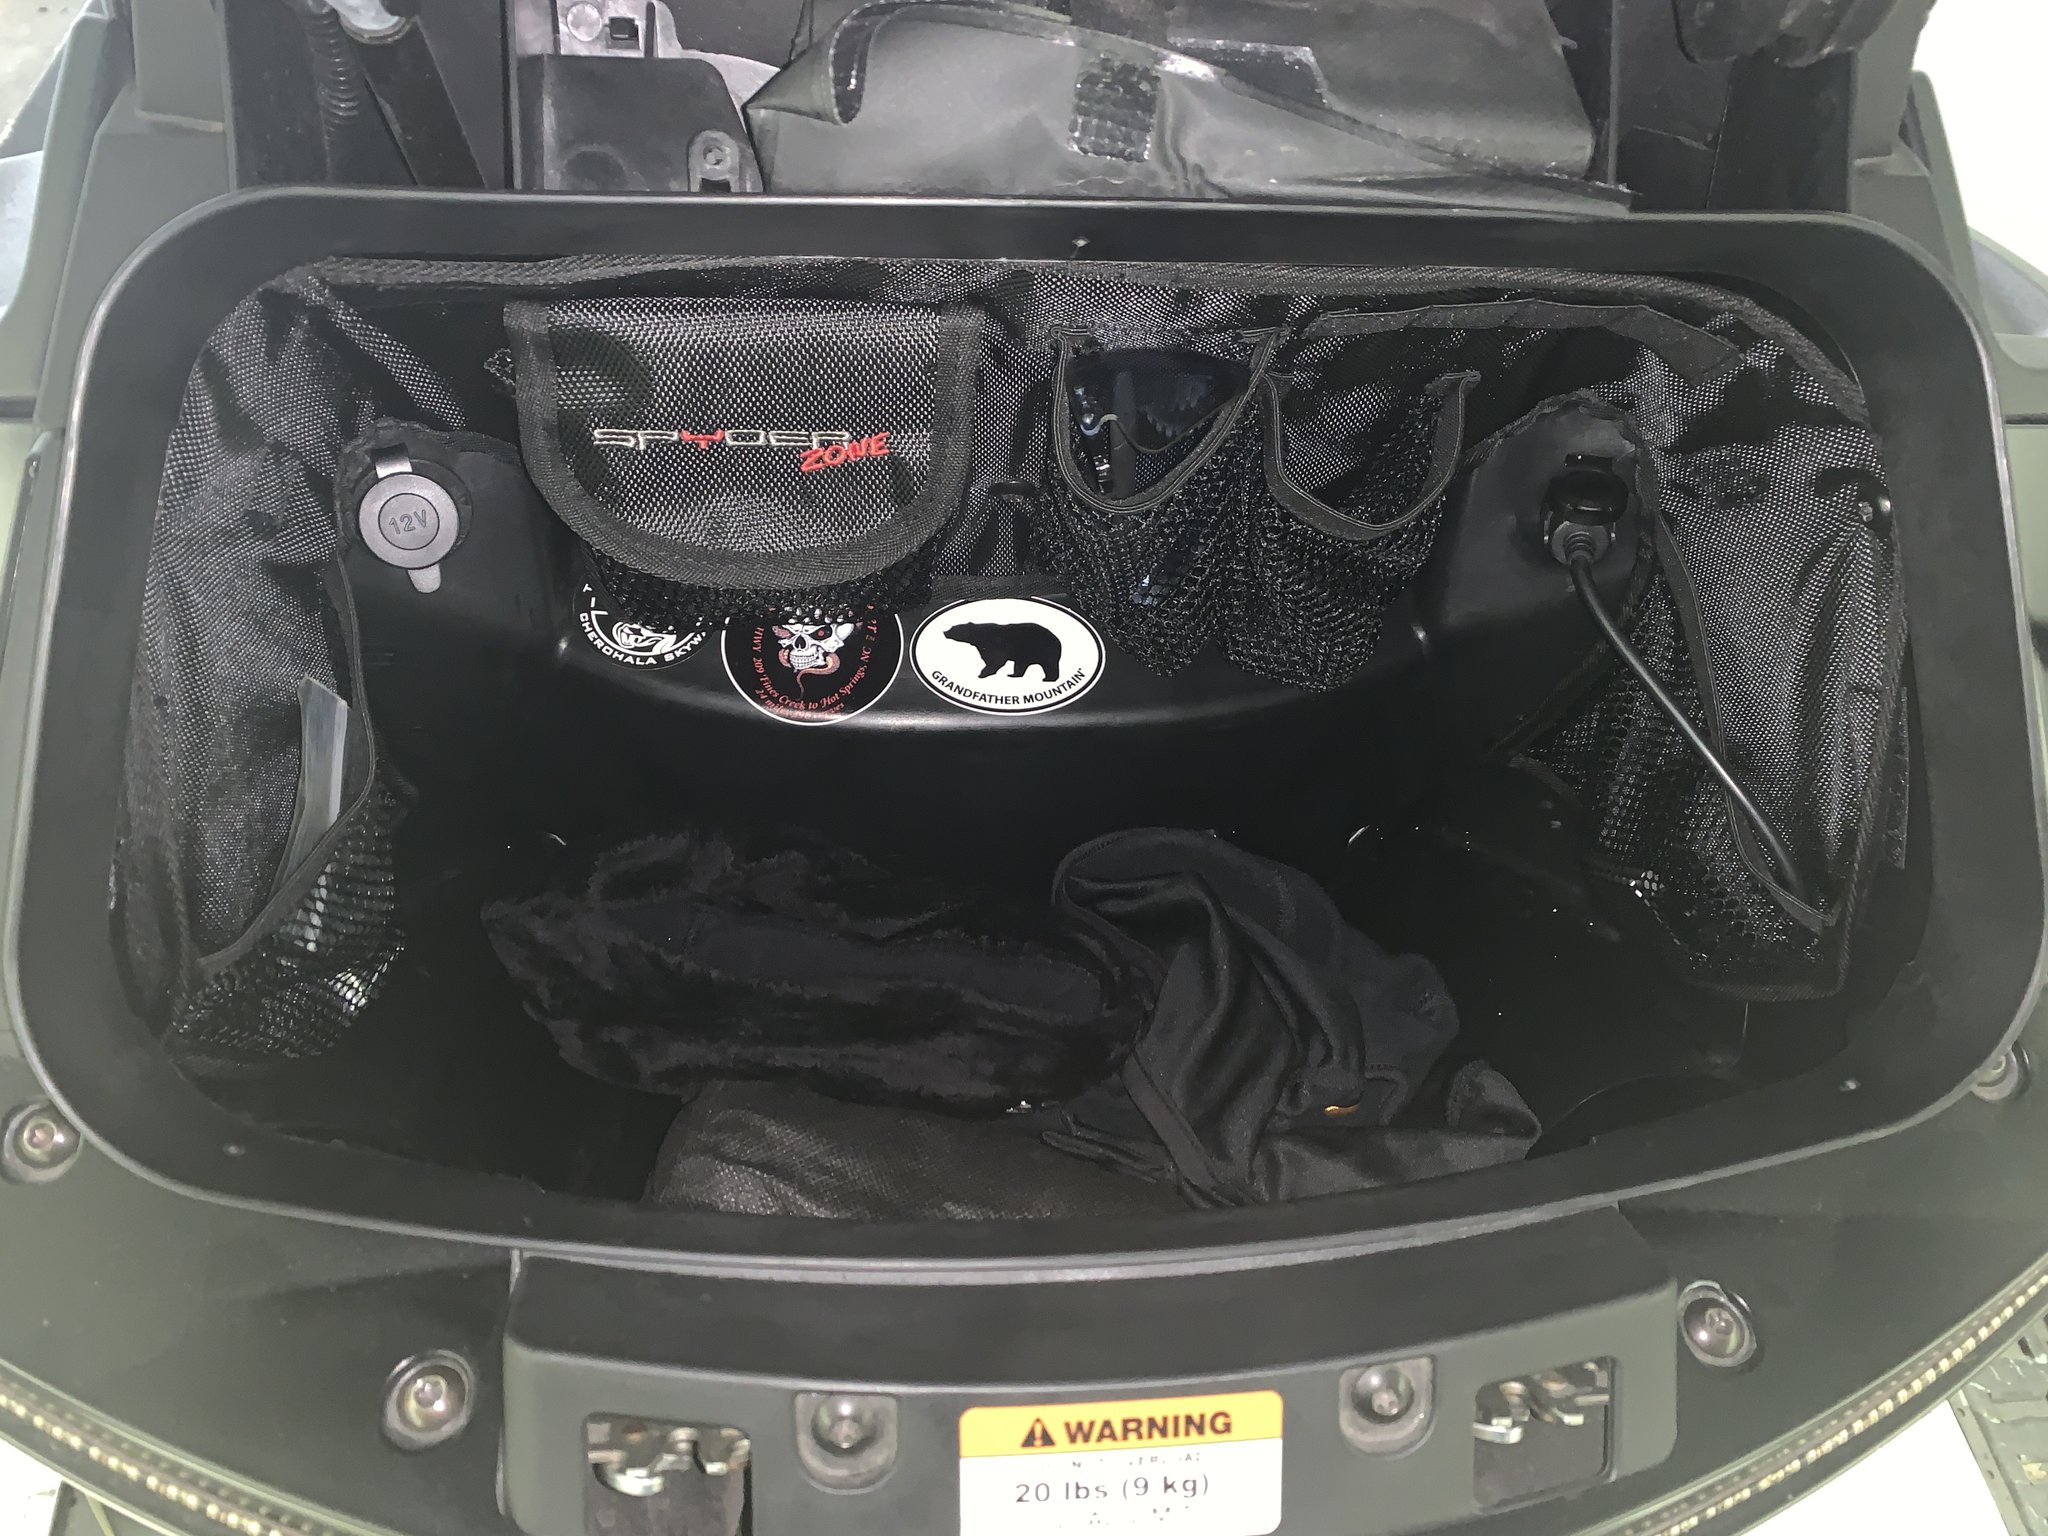 SpyderZone Rear Top Trunk Organizer for the Can-Am Spyder F3 Limited  (2017-2020)